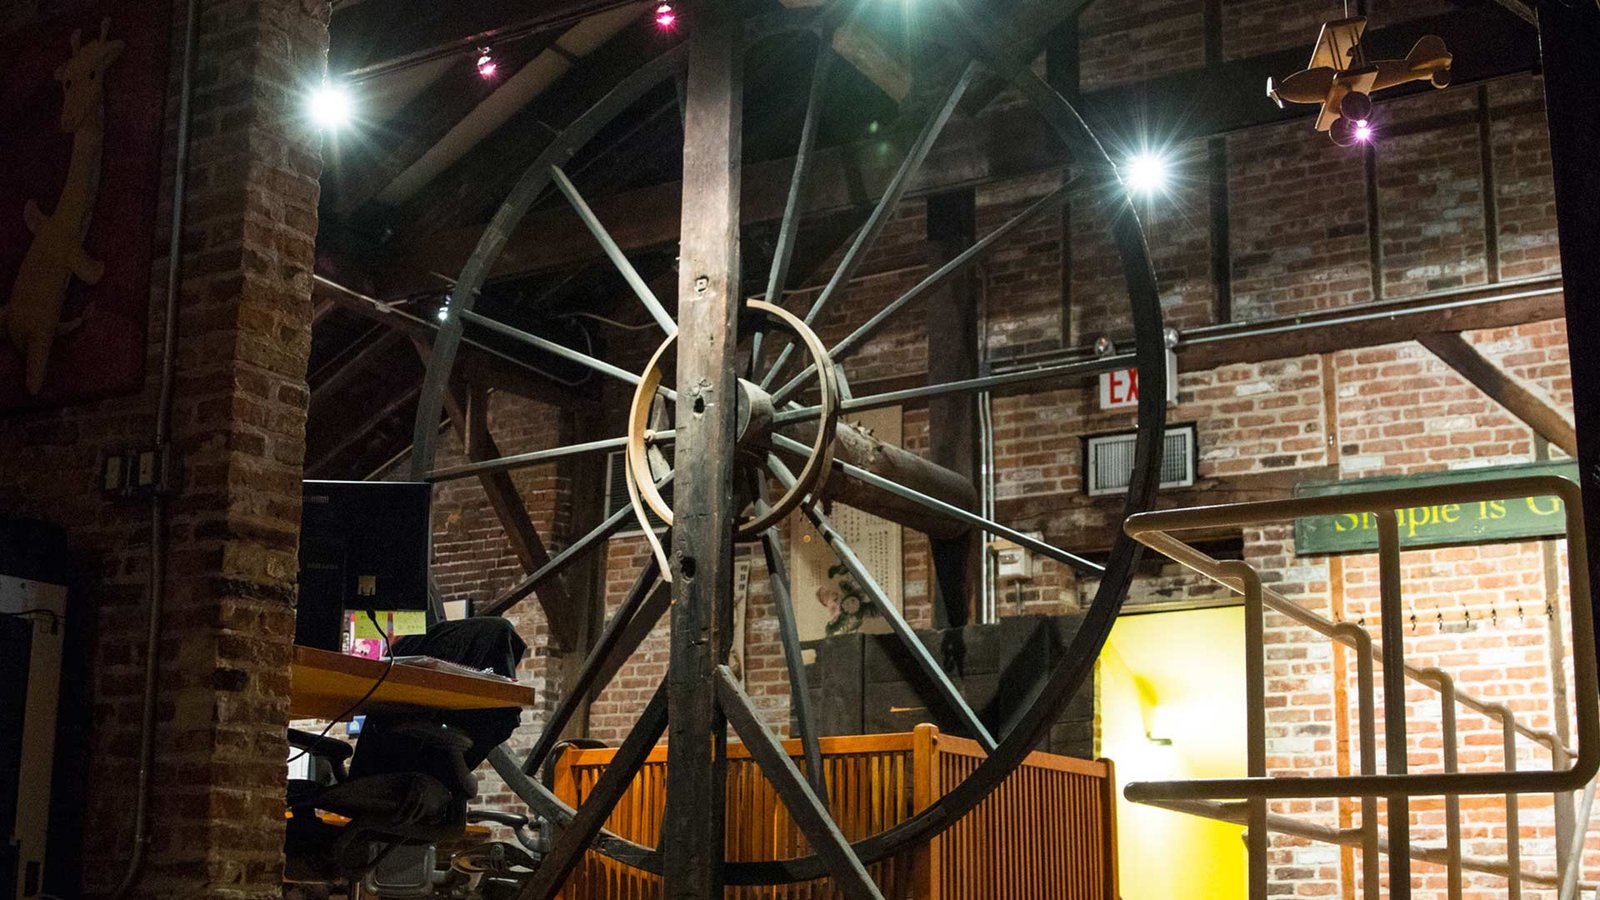 The wheel used to lift and lower cargo off boats 200 years ago is still here!